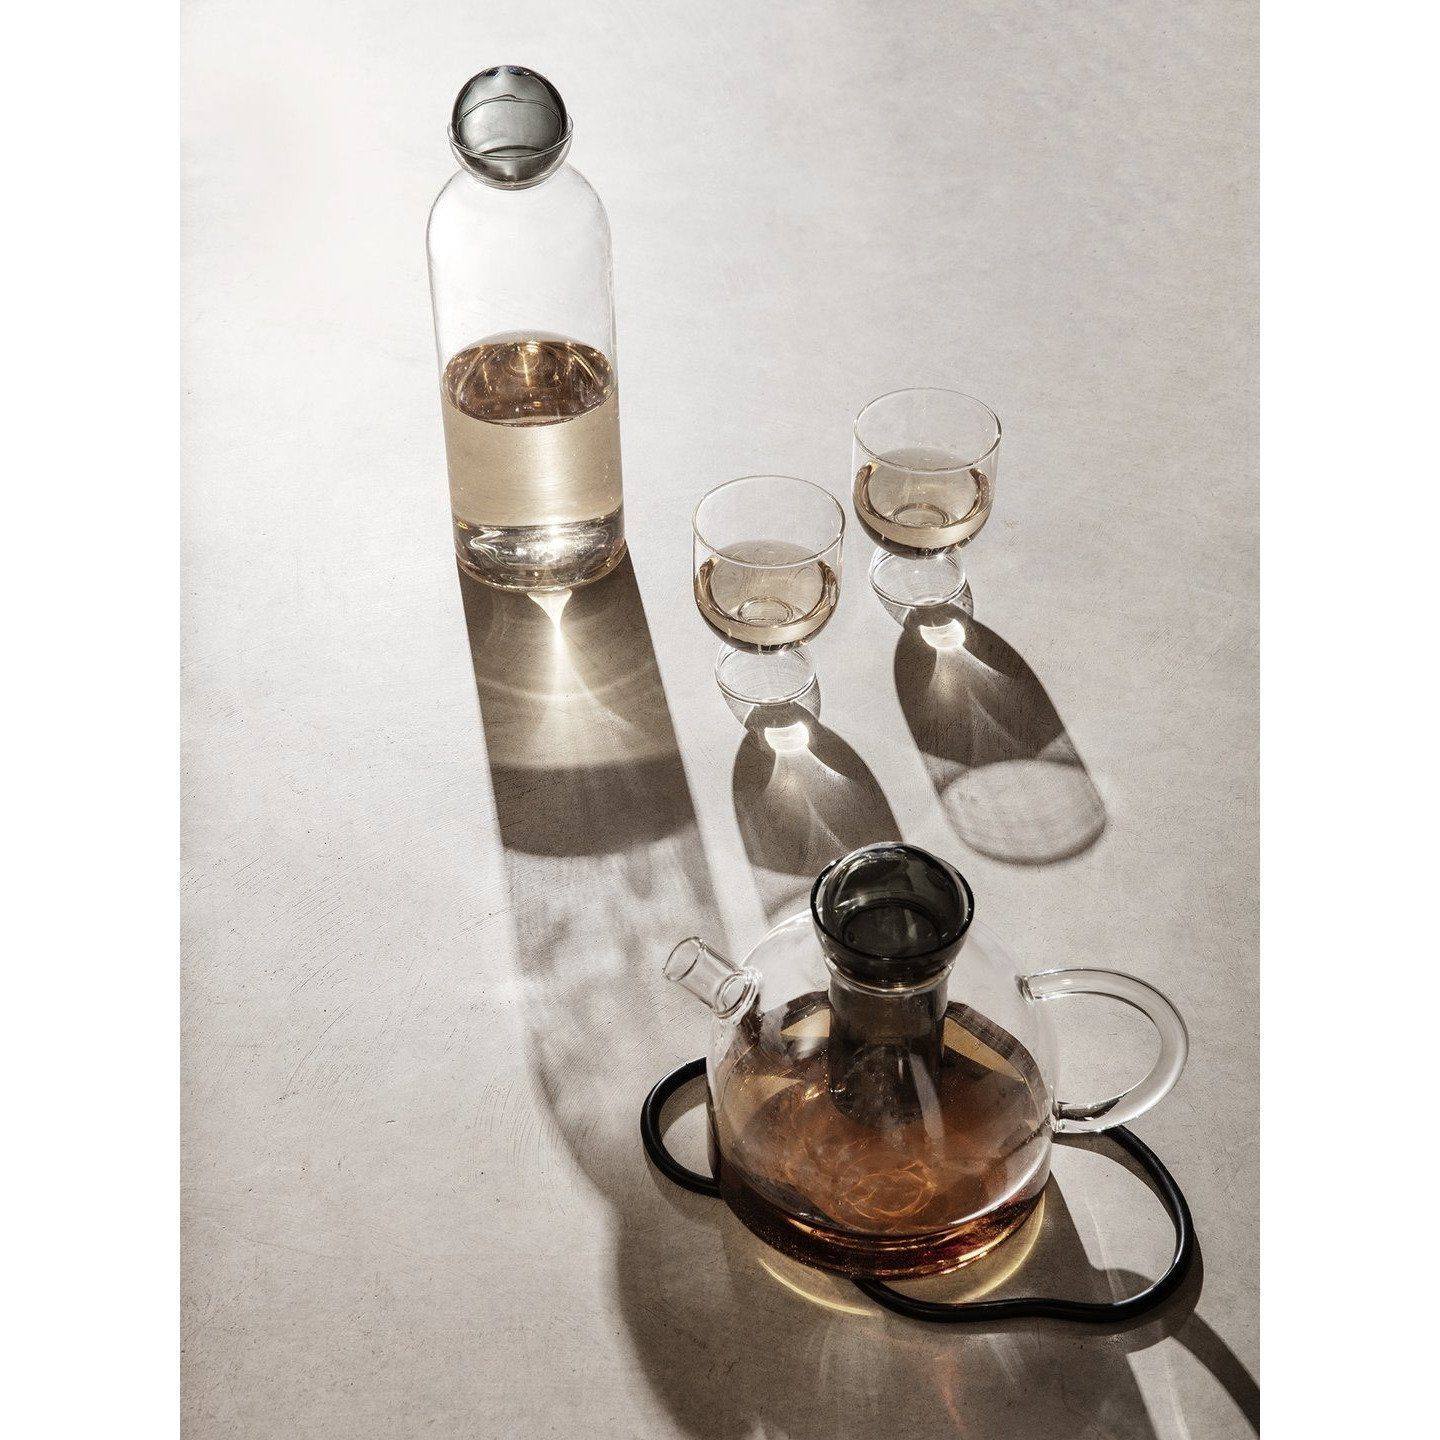 ferm LIVING Ripple Small Carafe Set by Trine Andersen